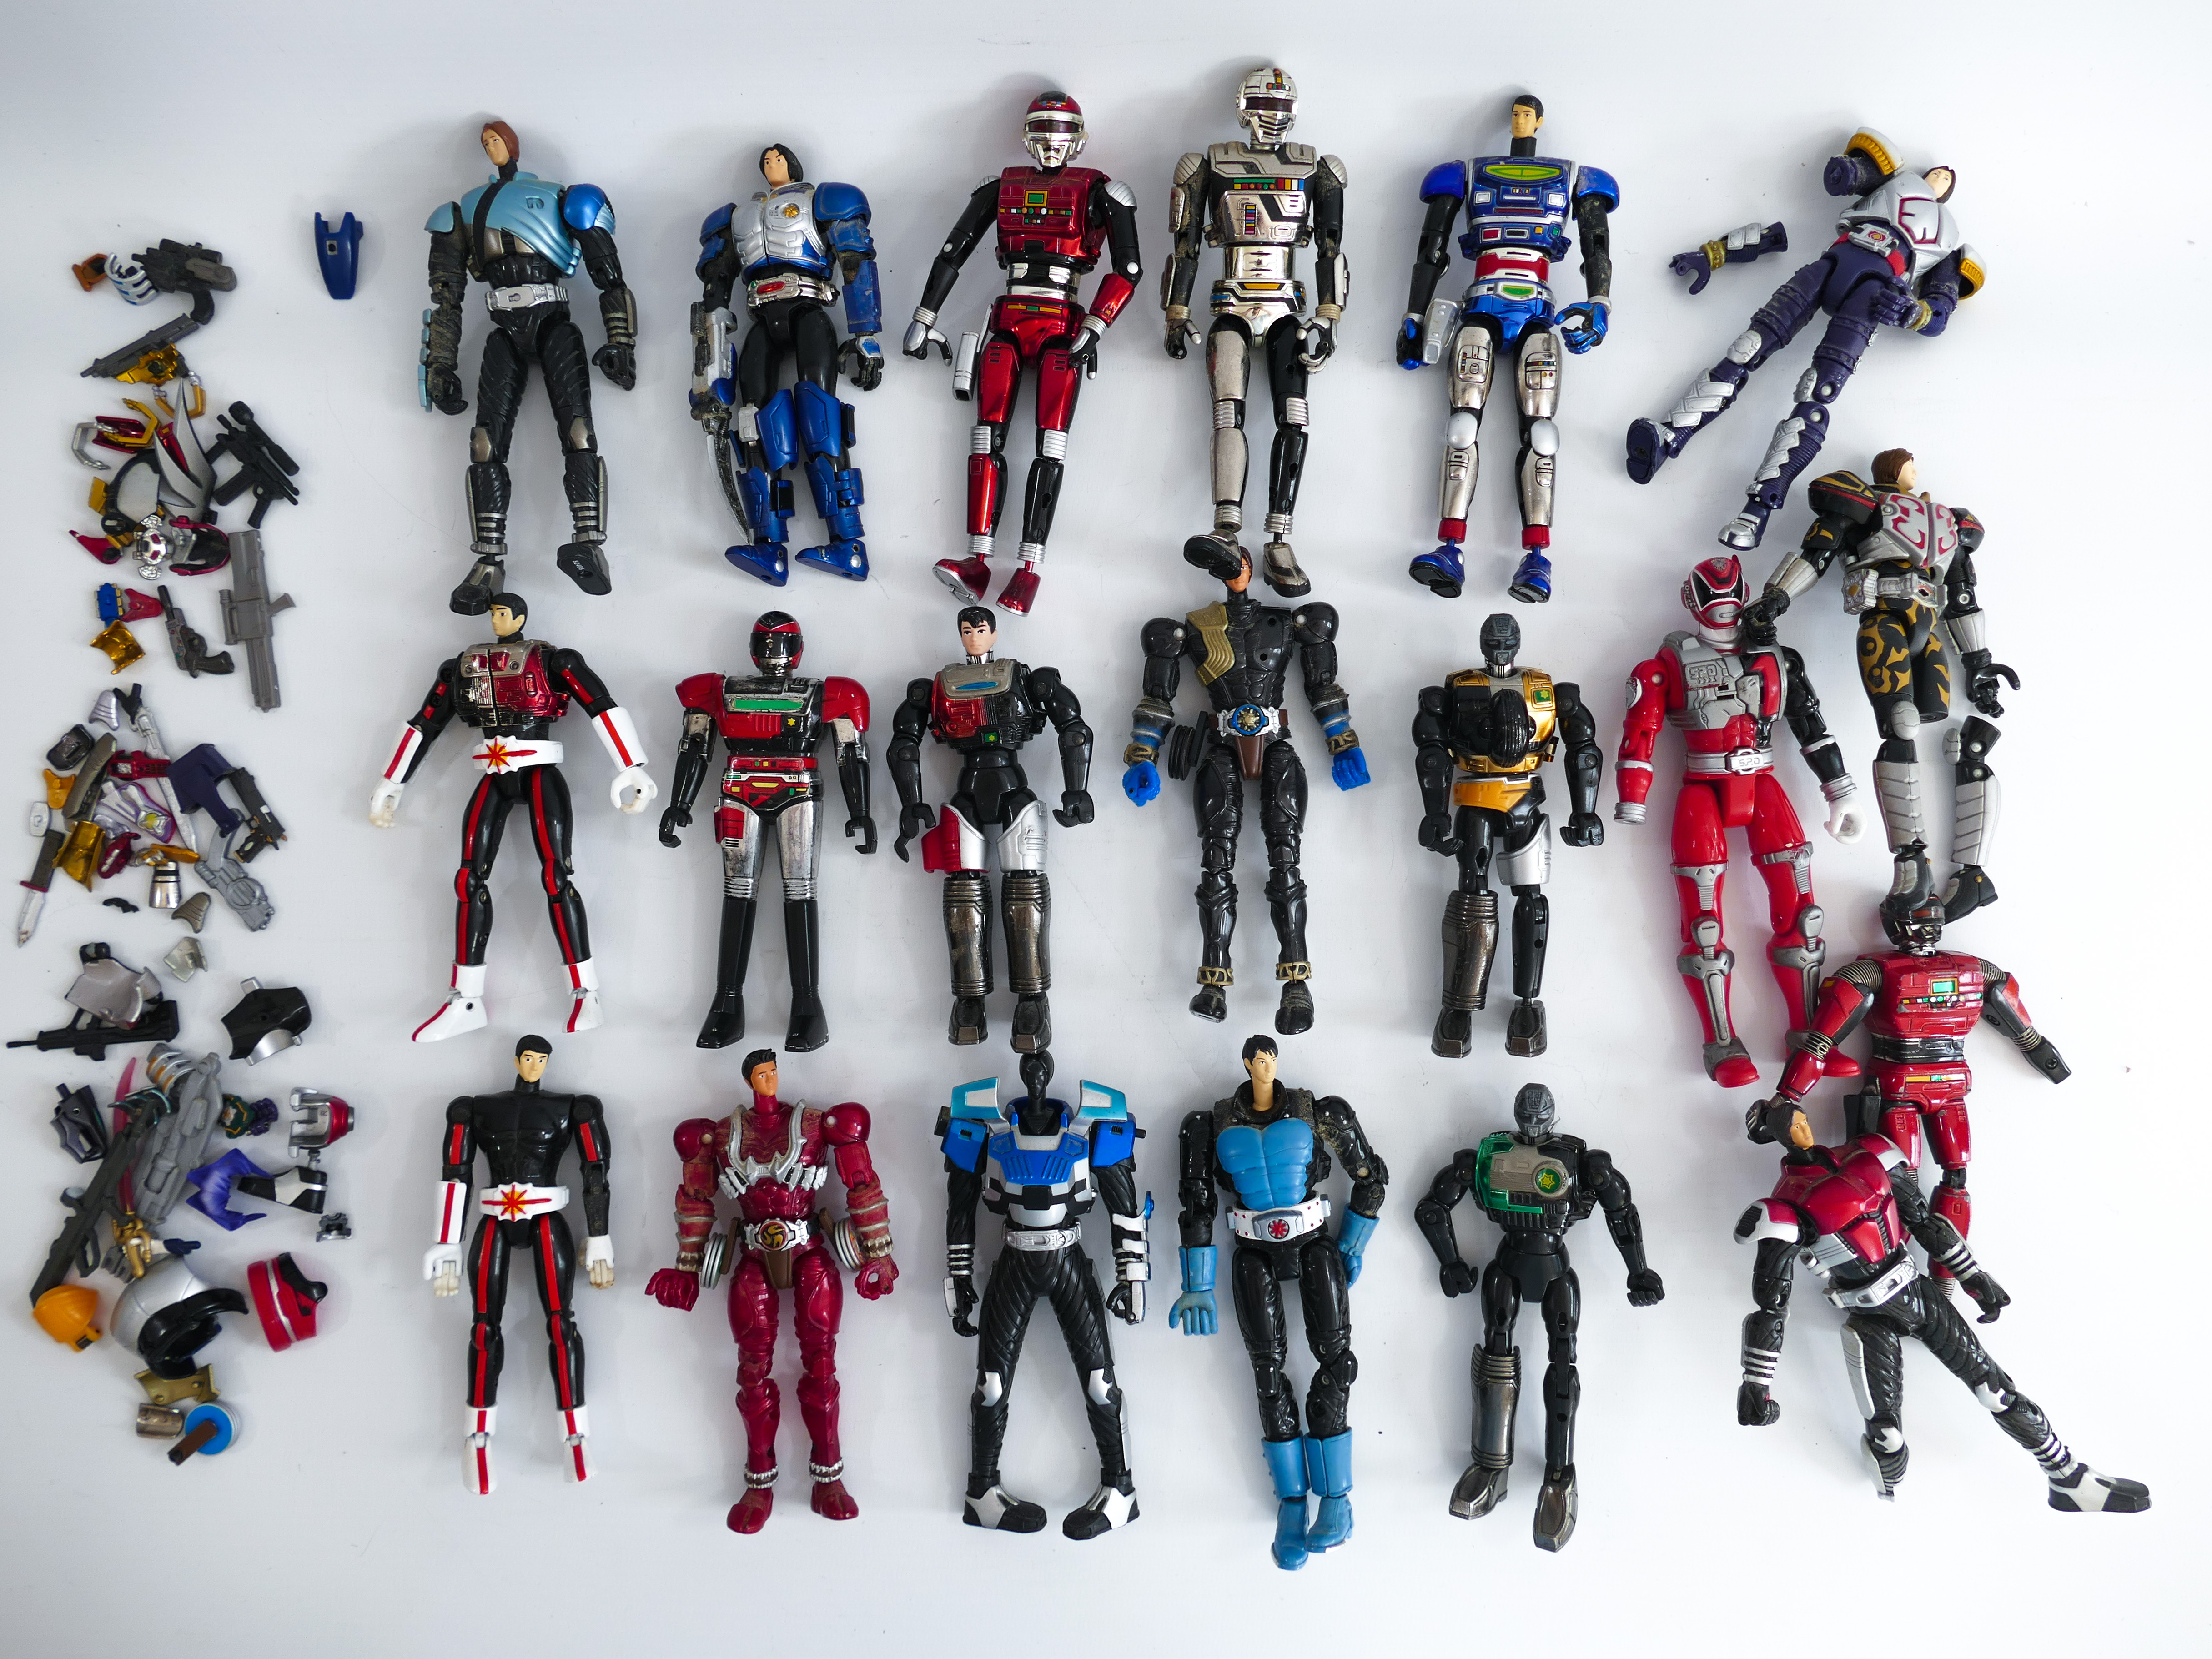 LOT OF JAPANESE TOY ANIME ACTION FIGURES. S.H. FIGUARTS. POWER RANGERS SPACE SHERIFF ETC. BANDAI